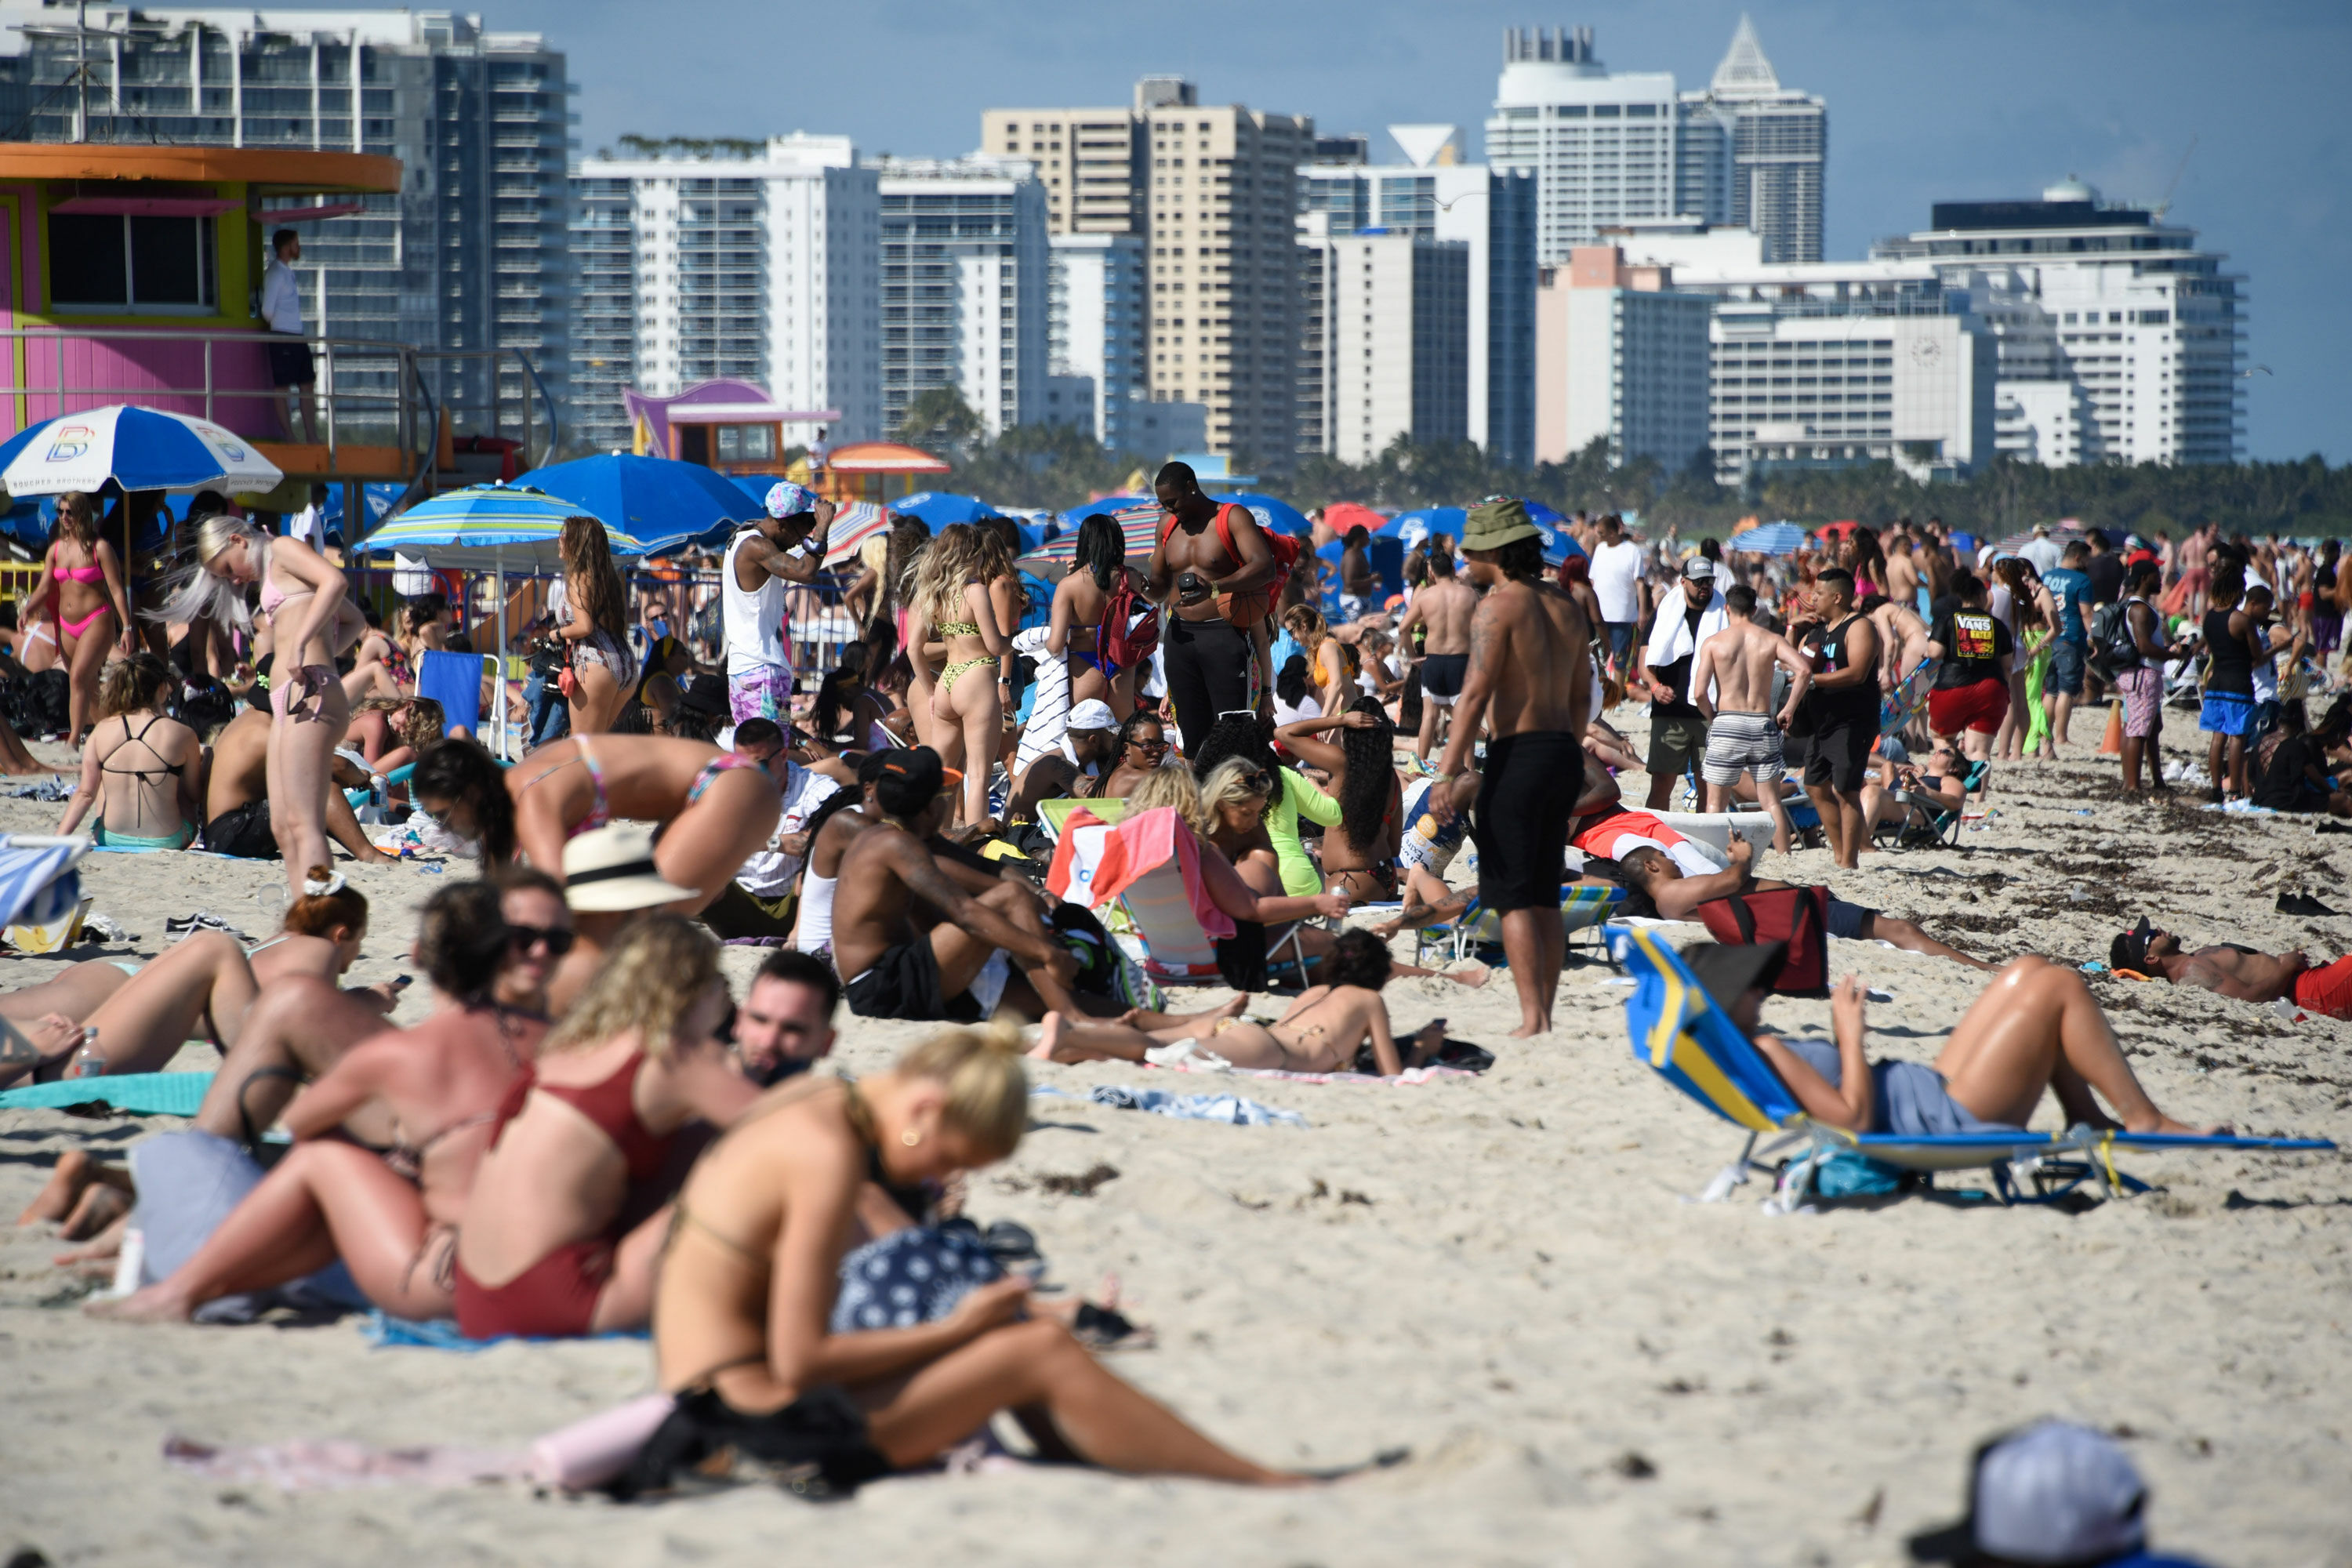 A Florida mayor says “too many people” are coming for spring break, while authorities ask for surveillance